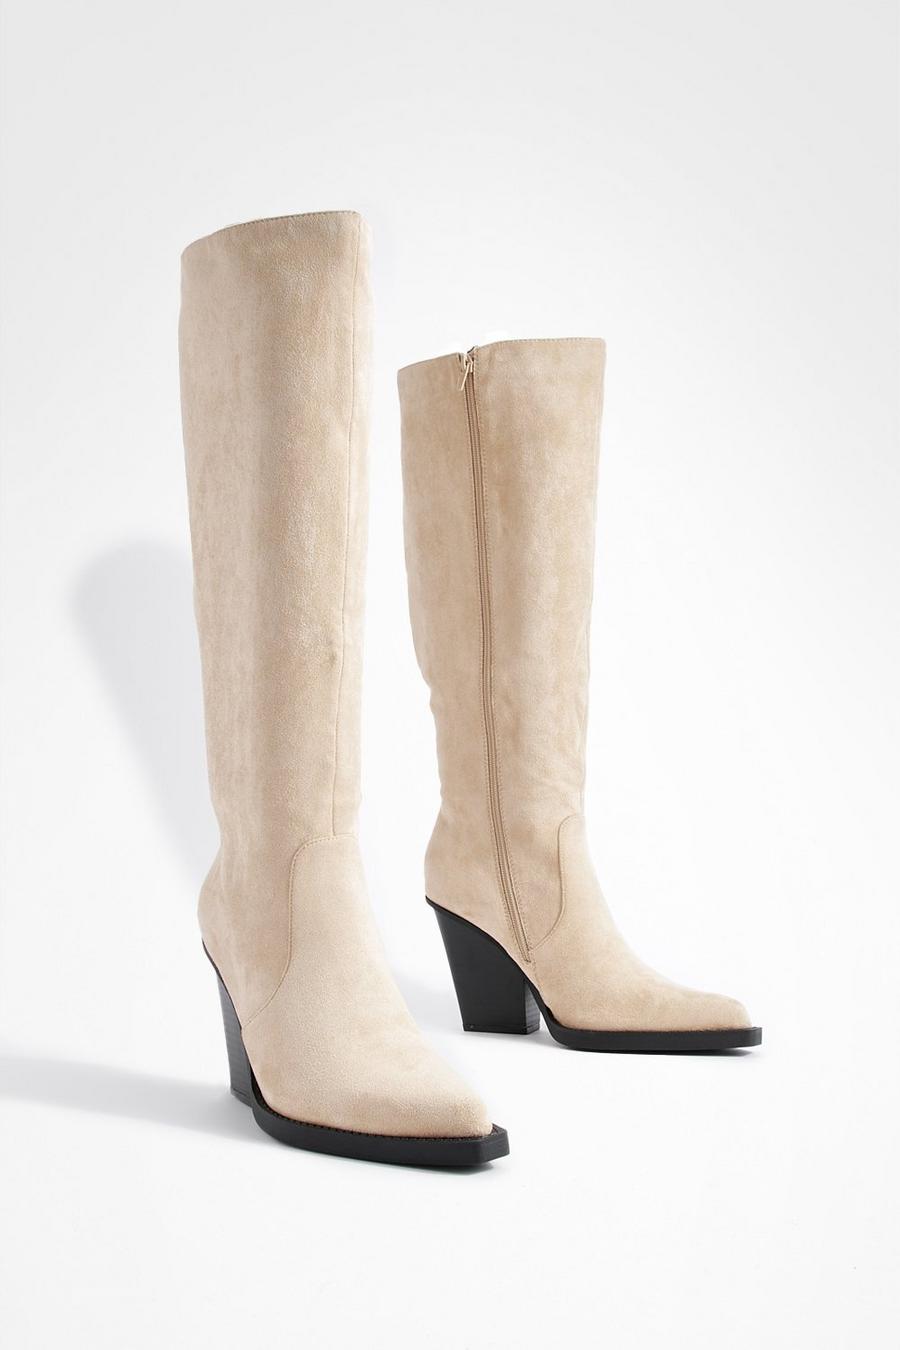 Mink Chunky Sole Knee High Cowboy Boots